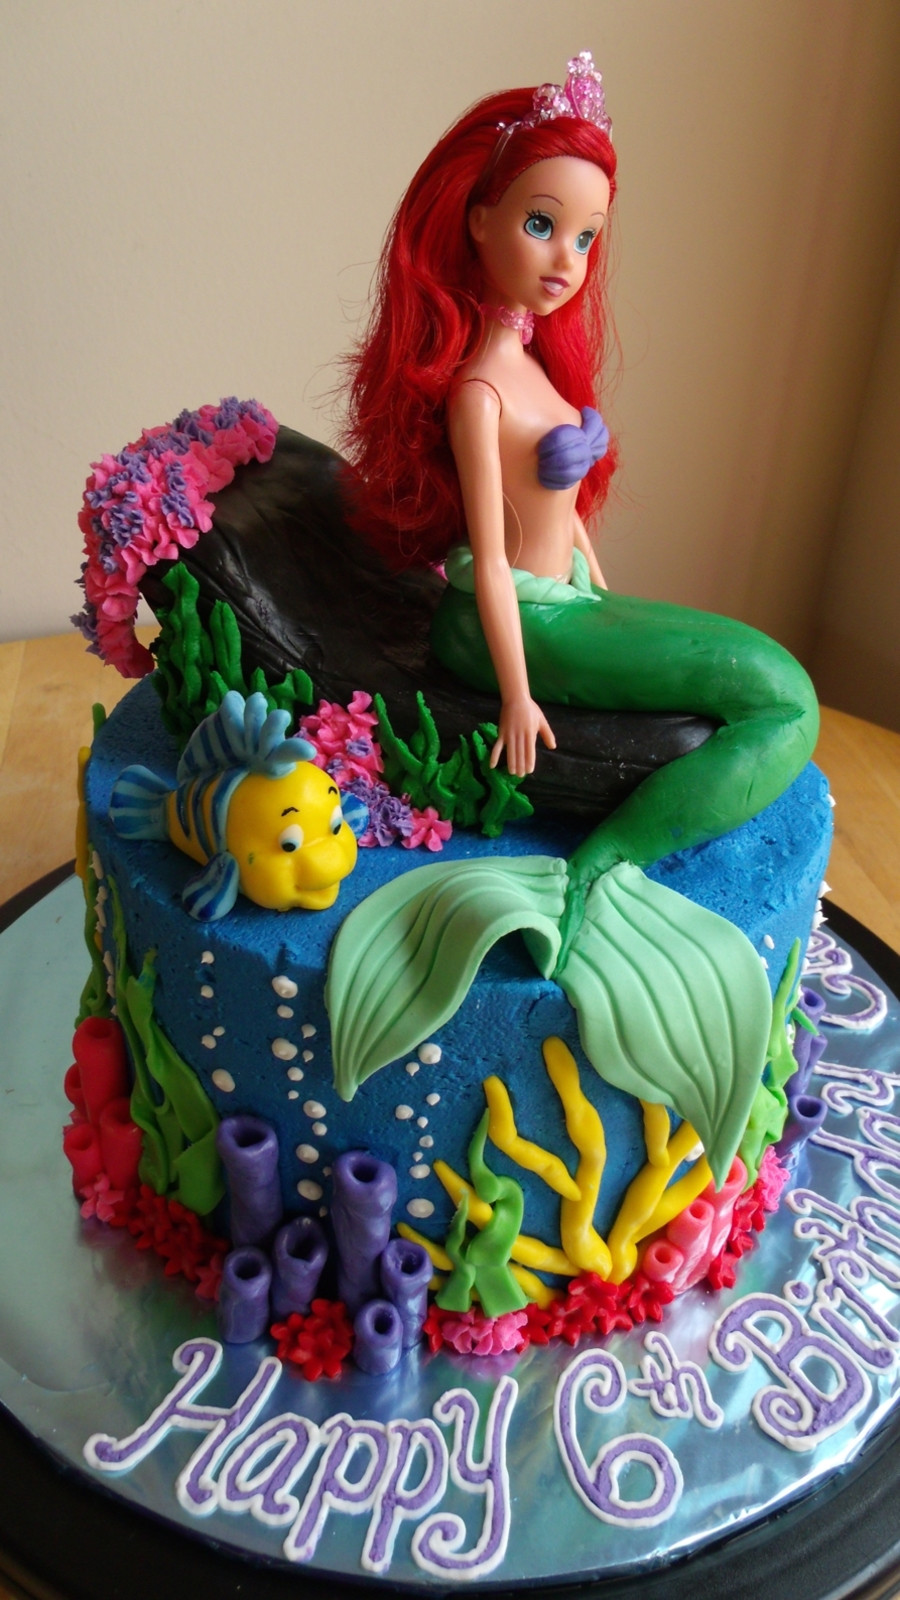 Little Mermaid Birthday Cakes
 The Little Mermaid Cake And Cupcakes CakeCentral